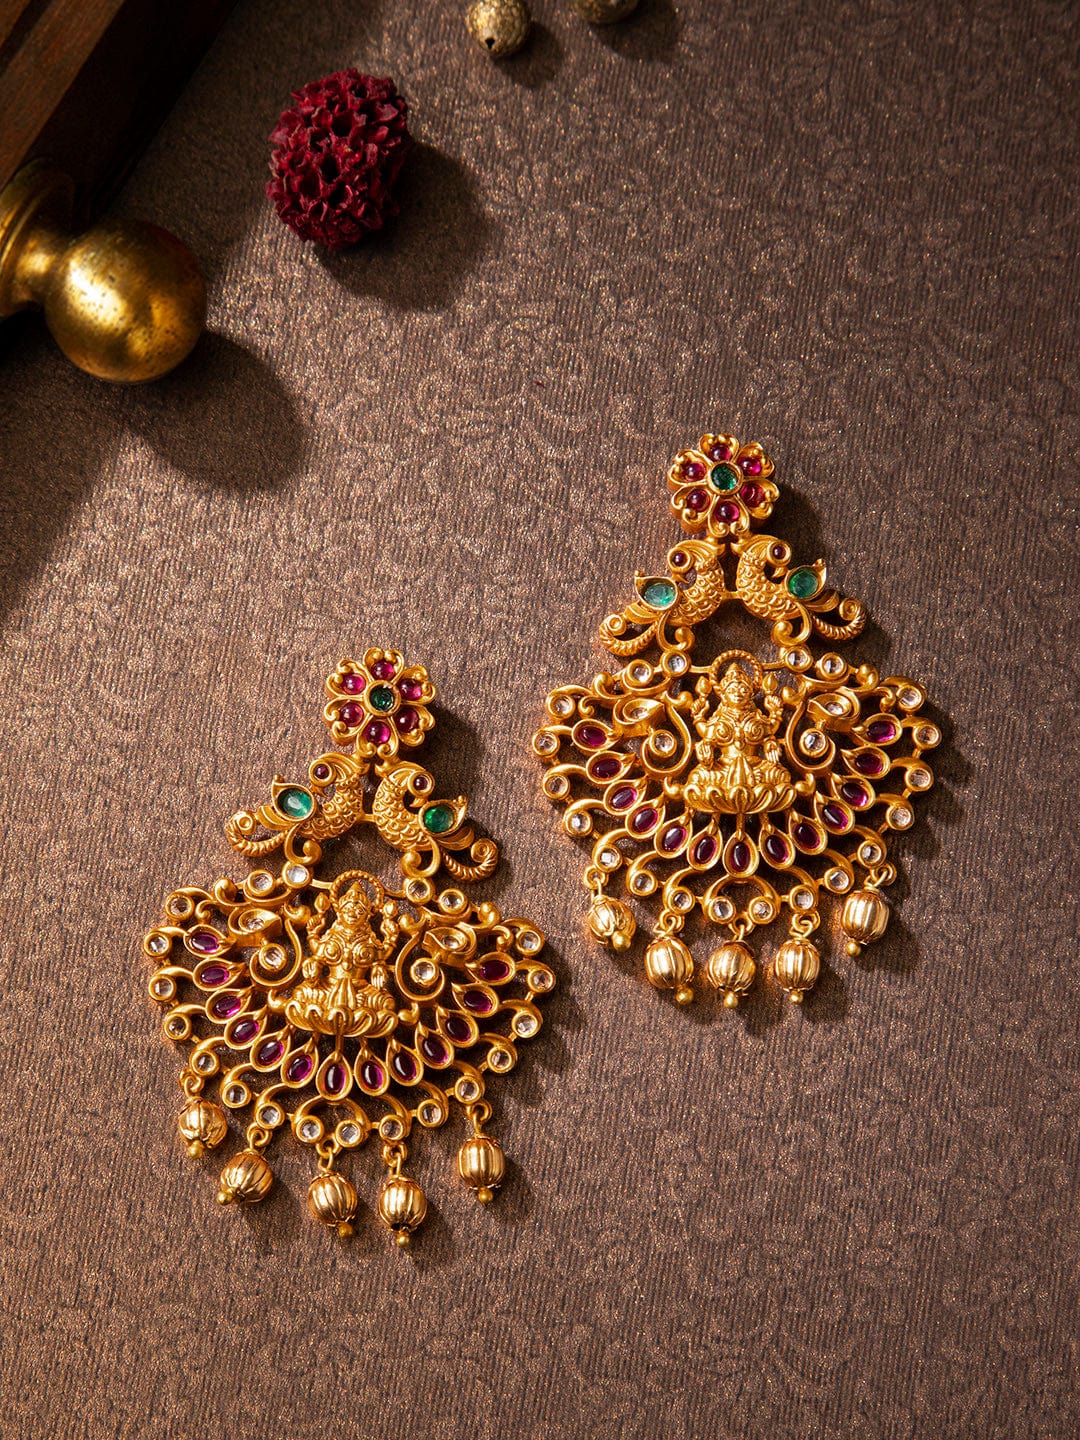 Gold Chandbali earrings with weight and price  Latest Gold Chandbali  designs  YouTube